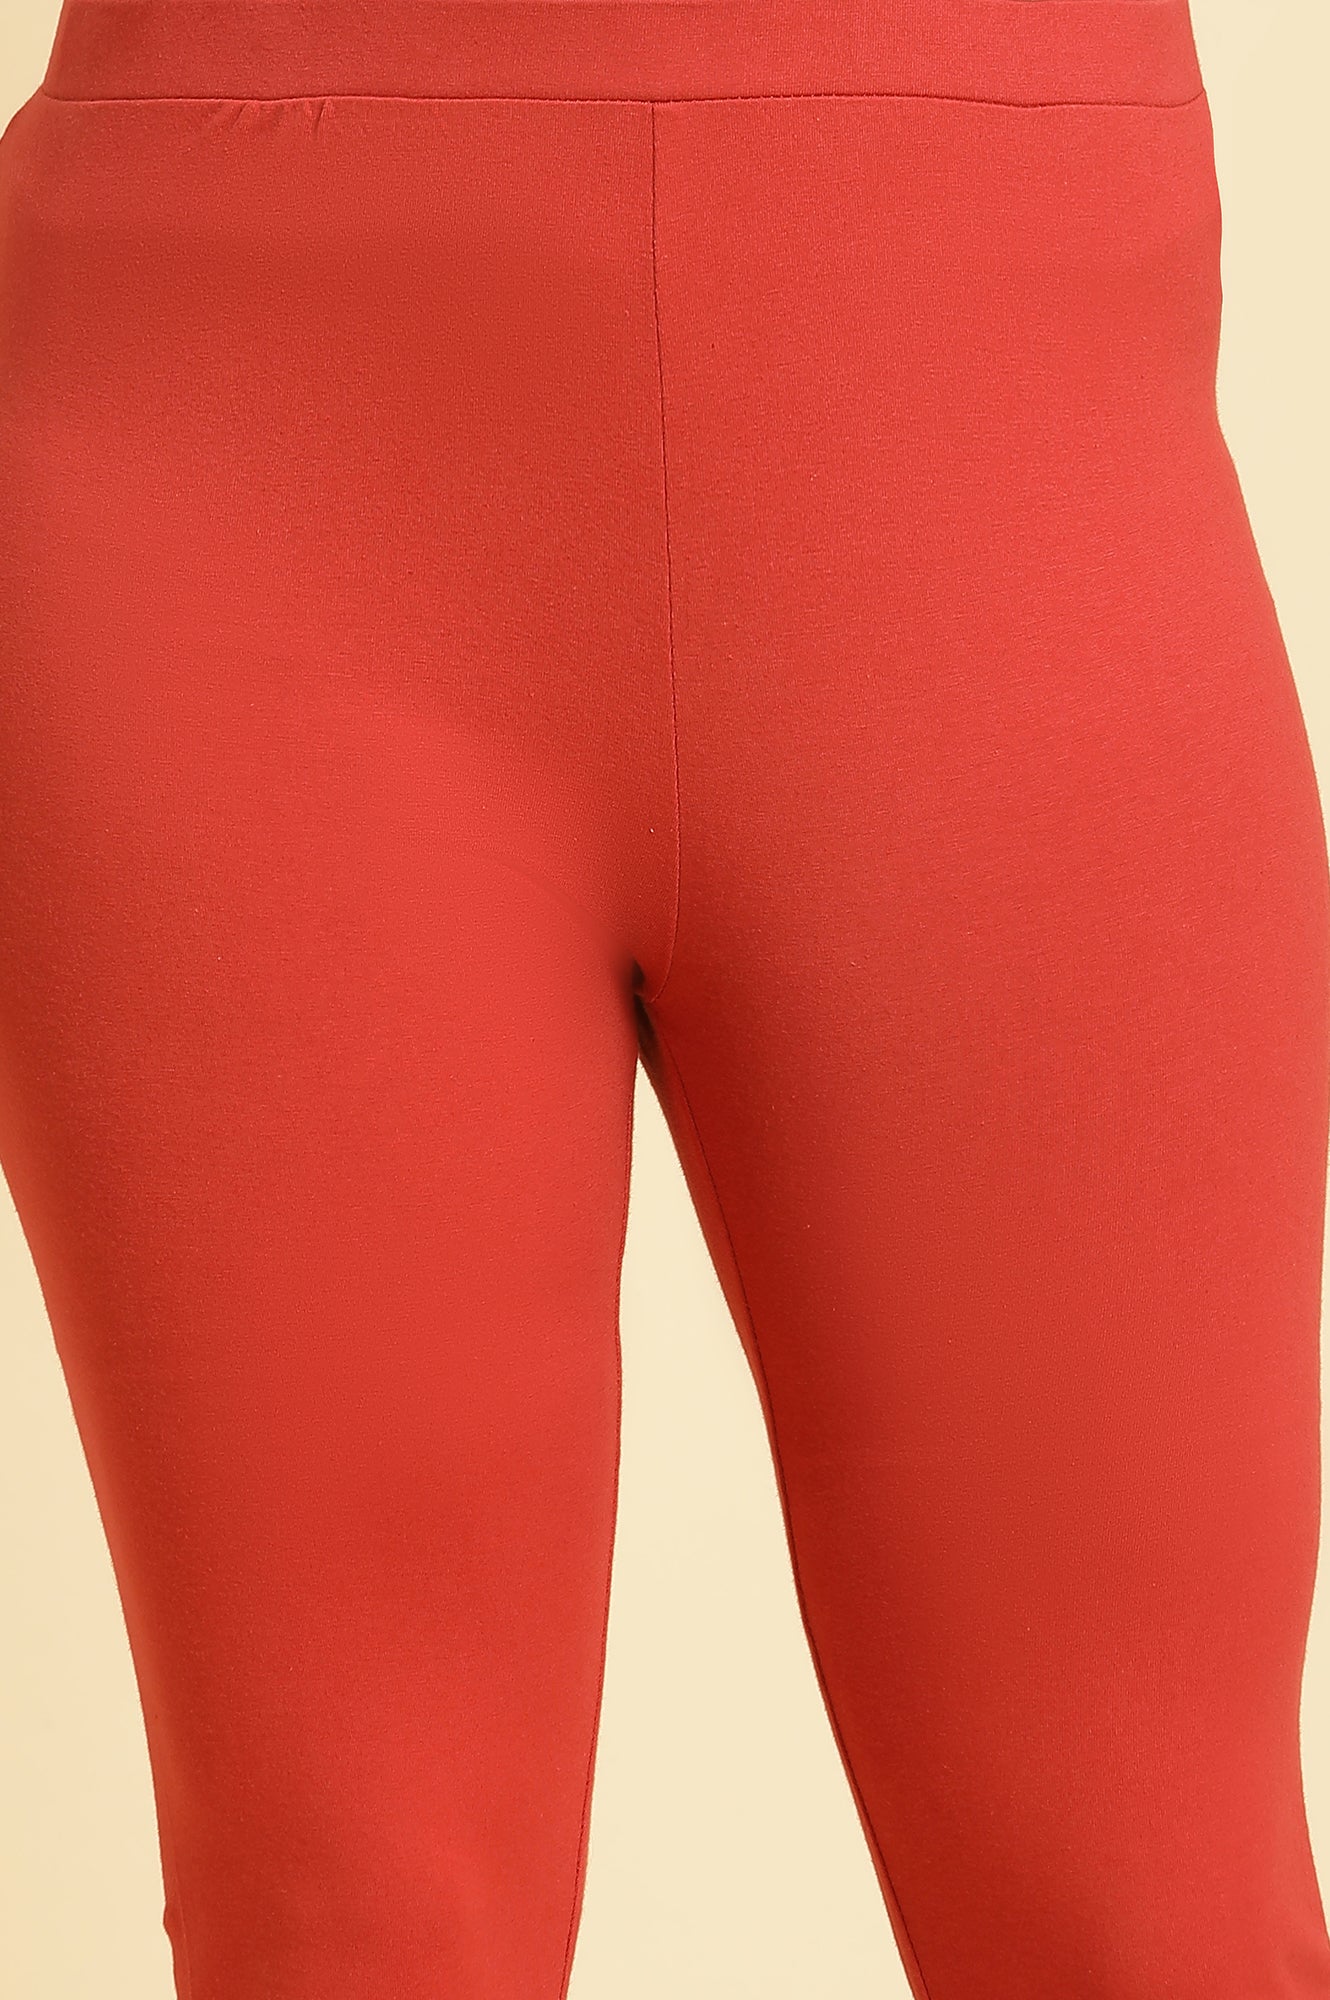 Rust Red Knitted Solid Tights.